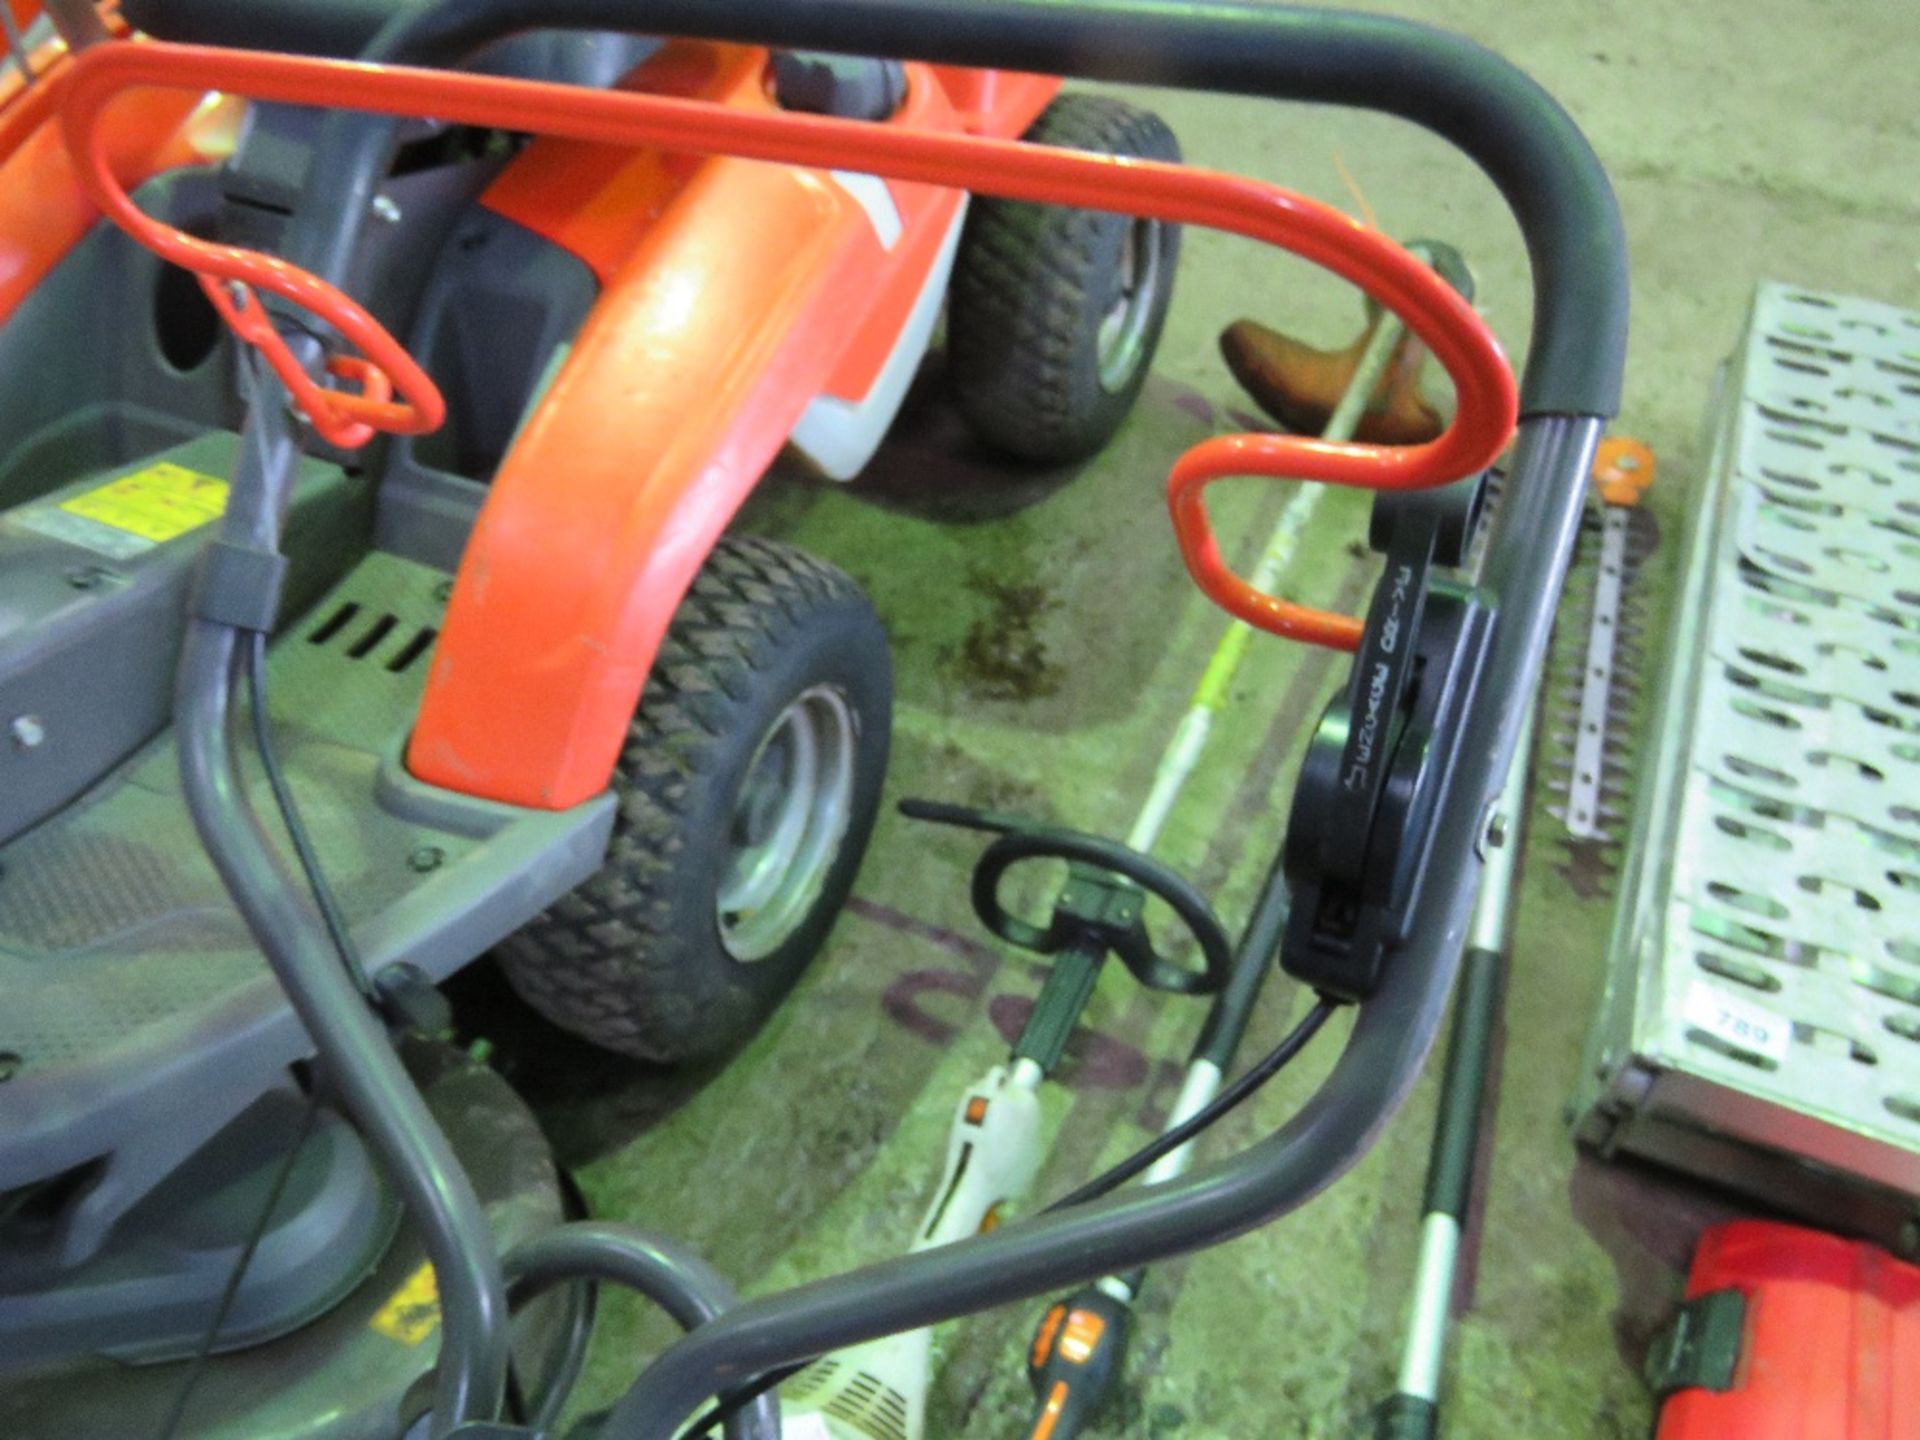 HUSQVARNA PROFESSIONAL MOWER. DIRECT FROM LANDSCAPE MAINTENANCE COMPANY DUE TO DEPOT CLOSURE. - Image 4 of 4